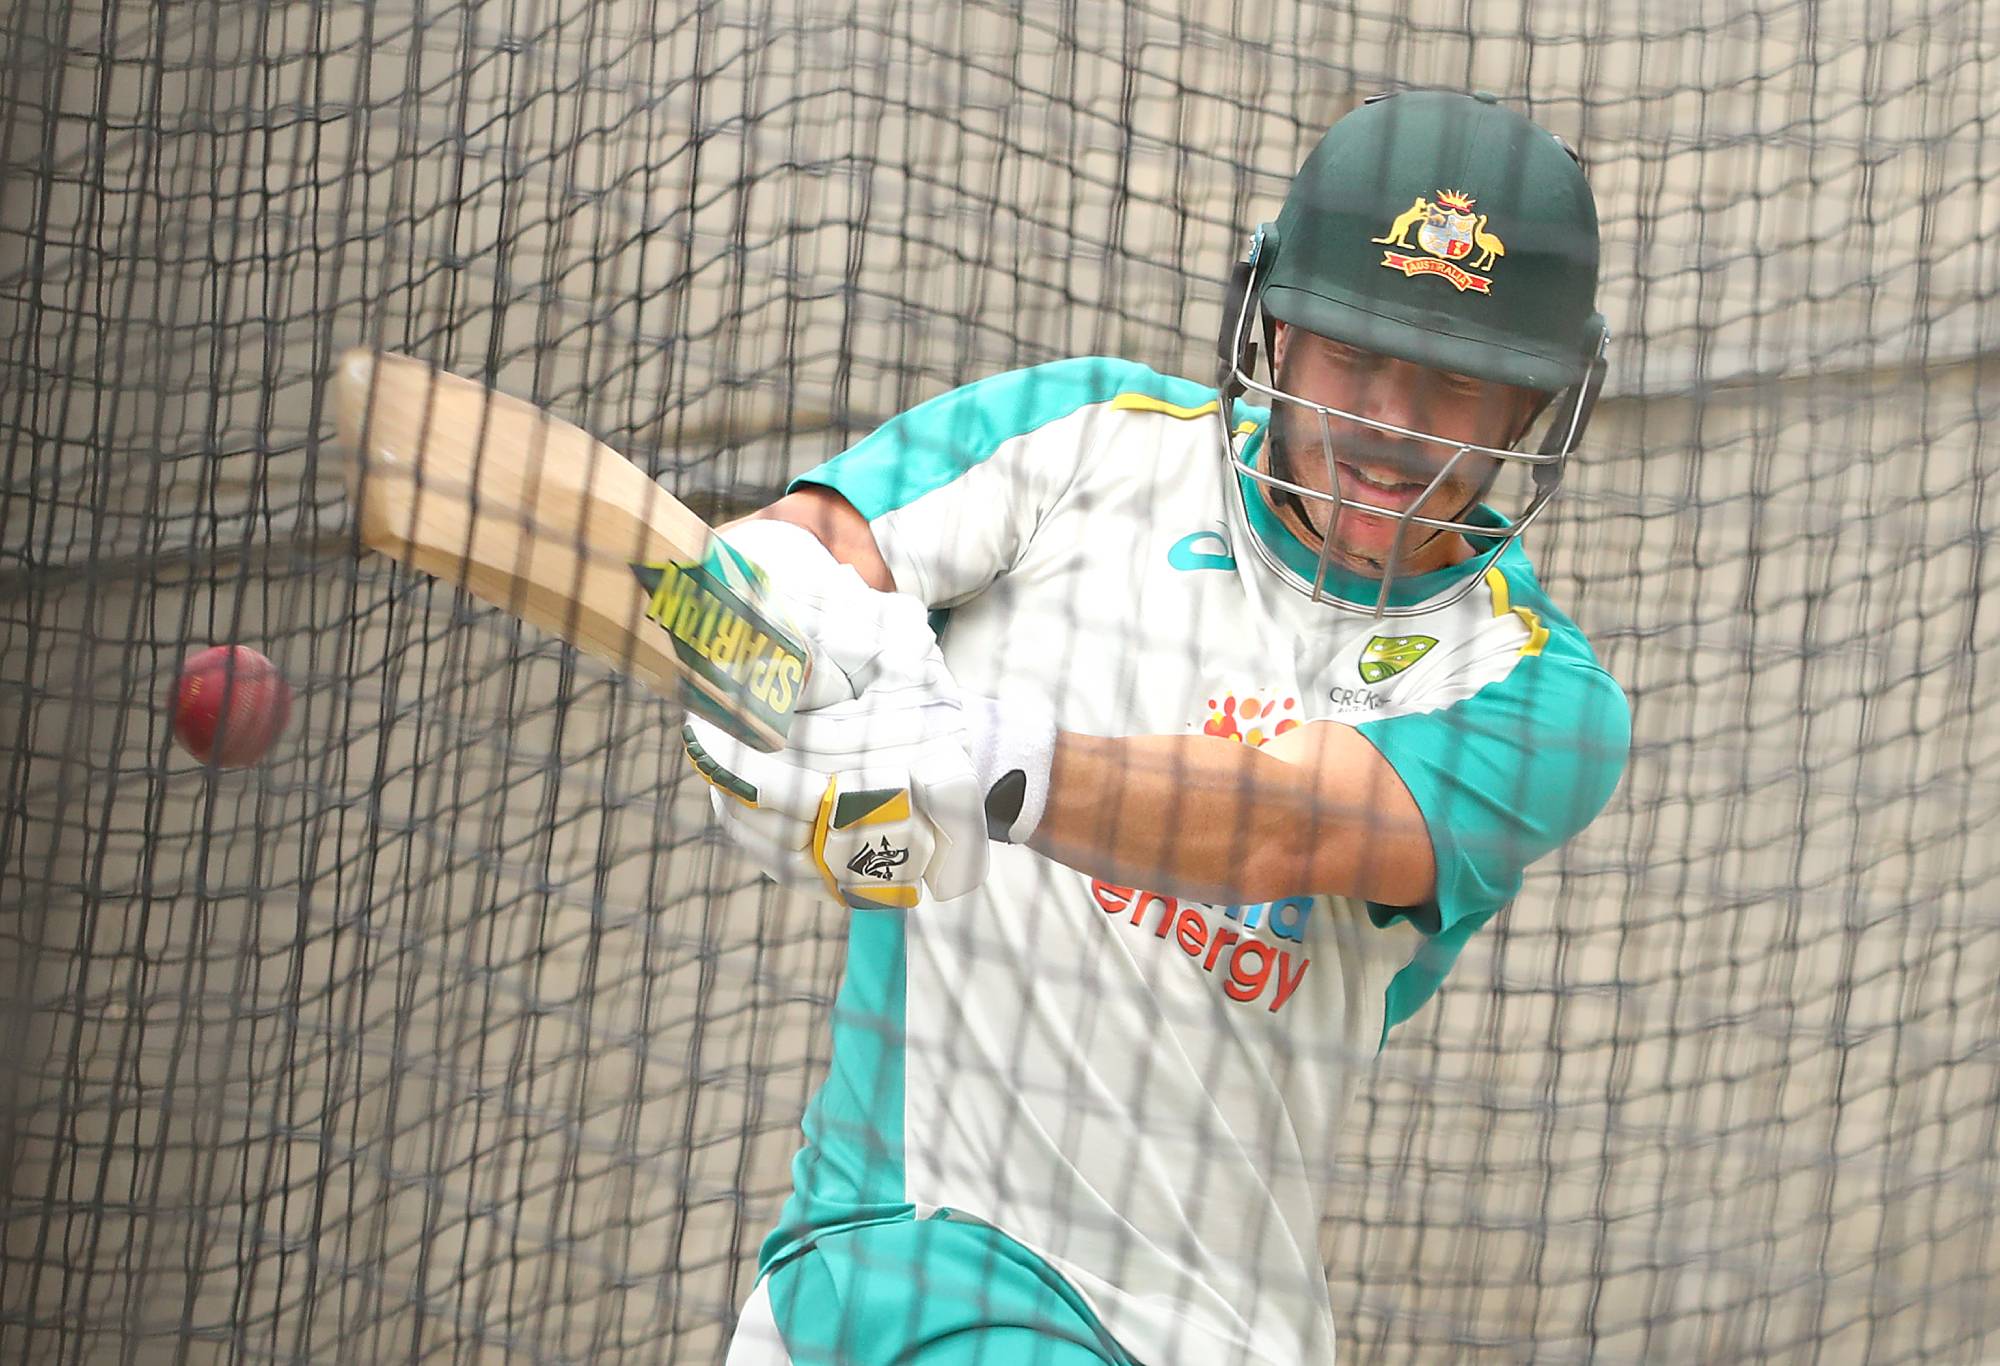 MELBOURNE, AUSTRALIA - JANUARY 02: David Warner bats during an Australian nets session at Melbourne Cricket Ground on January 02, 2021 in Melbourne, Australia. (Photo by Kelly Defina/Getty Images)